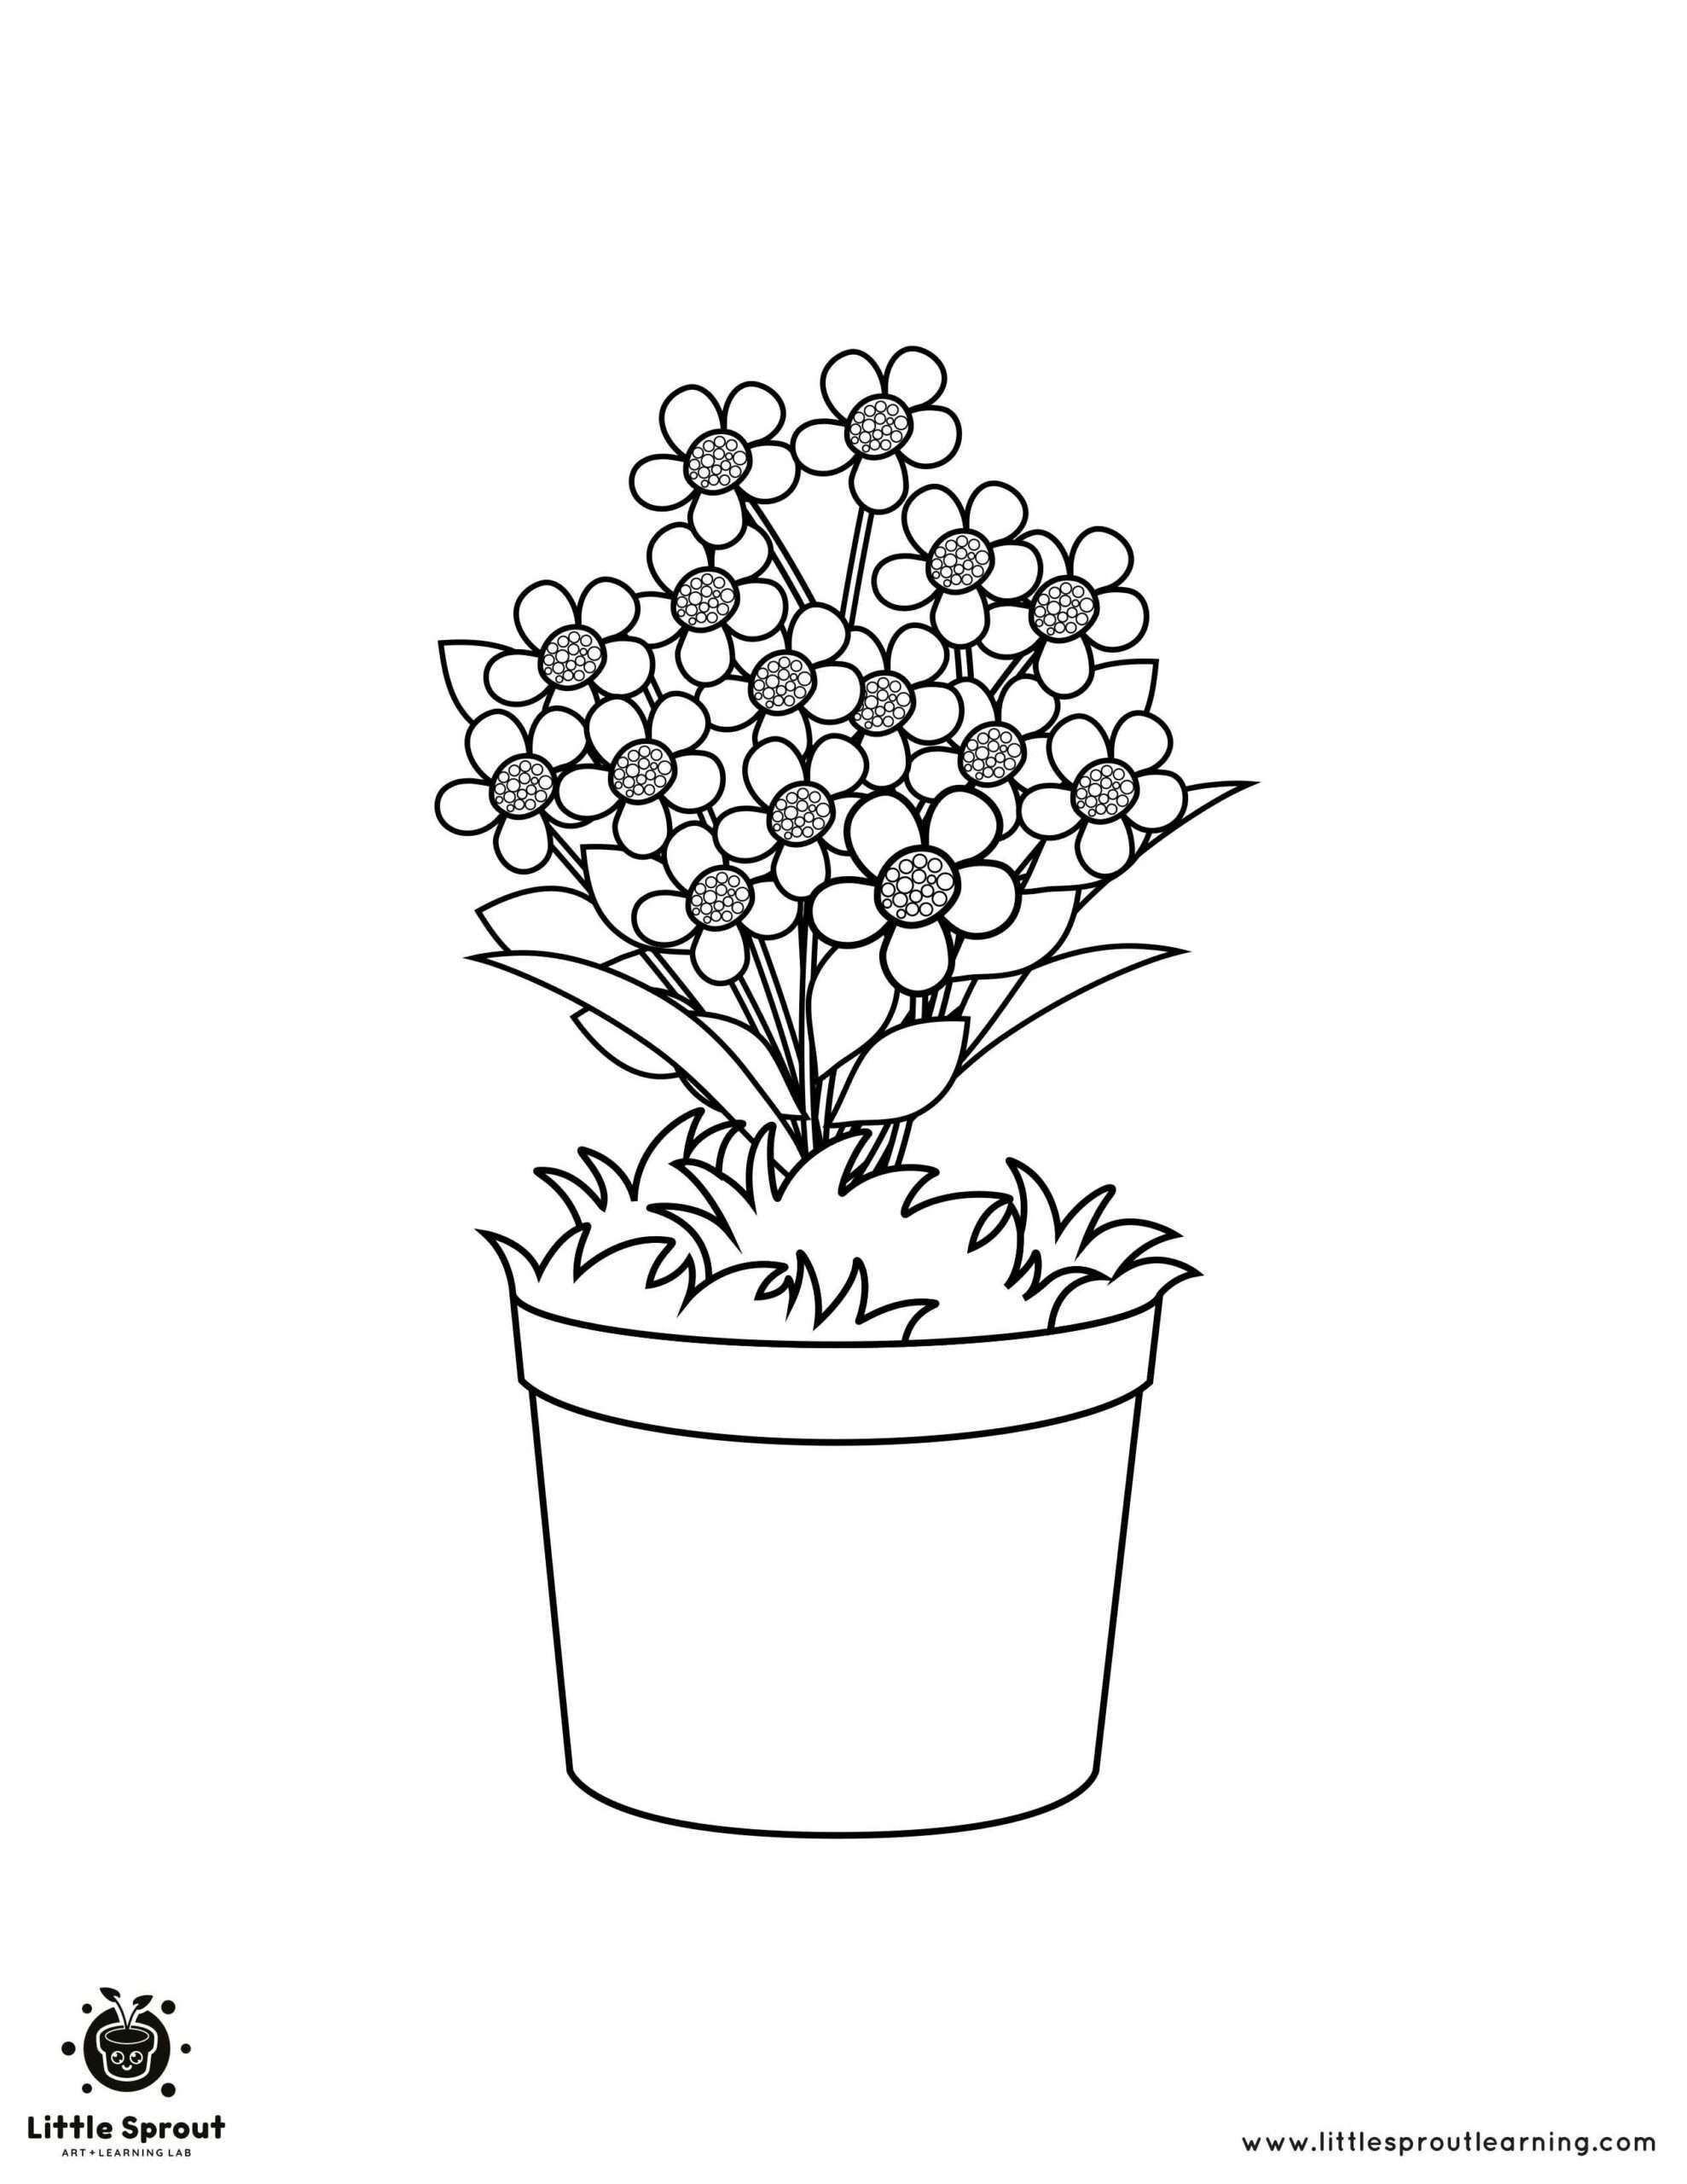 Daisy flower Coloring Page